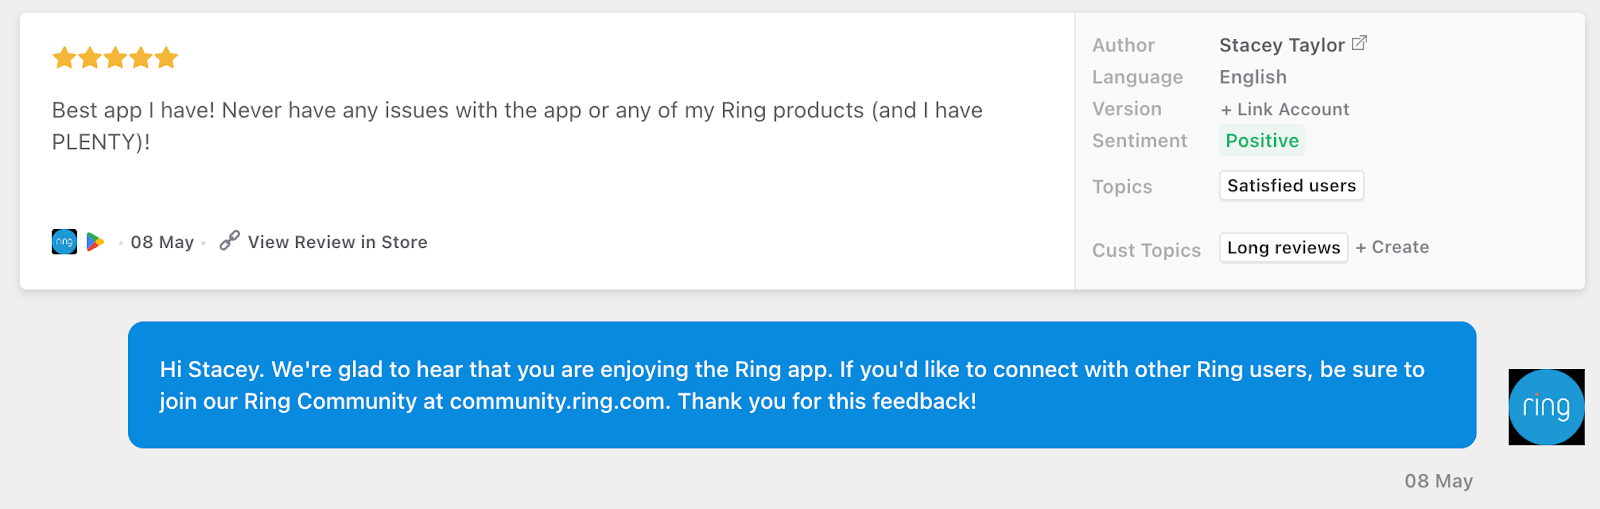 Great Ring review reponse